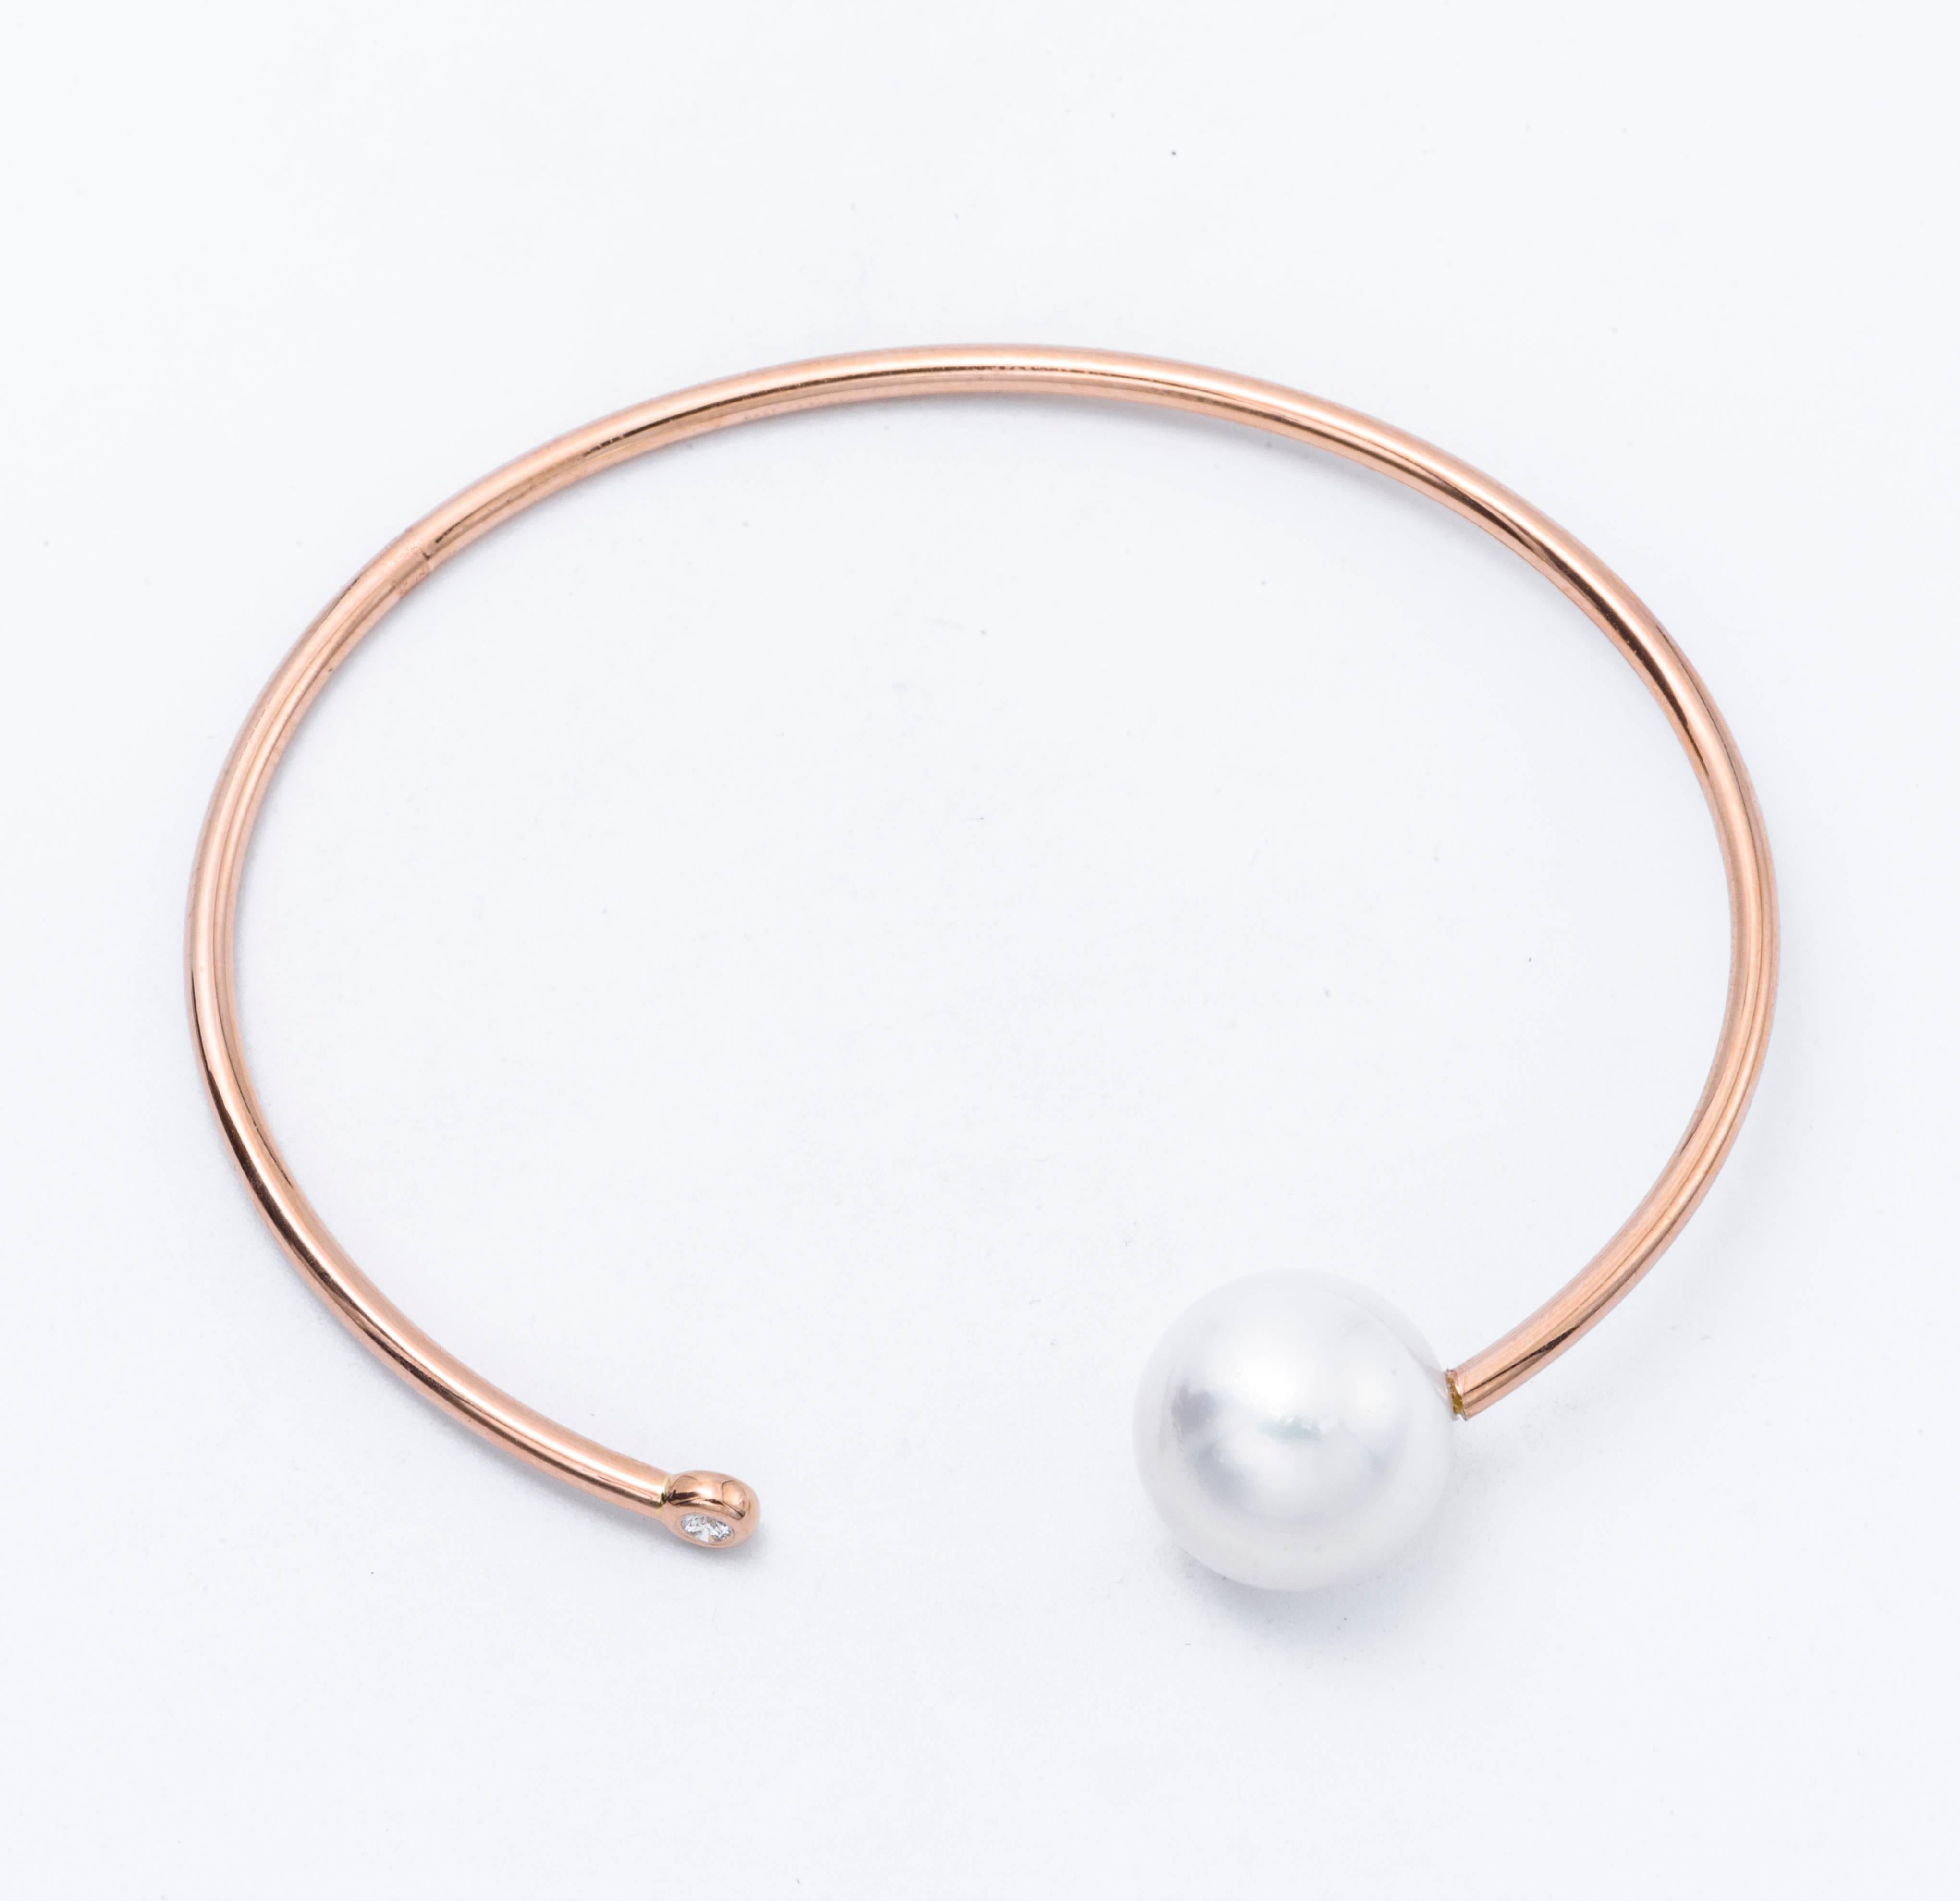 18K Rose gold open bracelet featuring one South Sea Pearl measuring 11-12 mm and one diamond weighing 0.06 Carats.
Color G-H
Clarity SI

Pearls can be changed to Pink, Tahitian or Golden upon request. Price subject to change.
